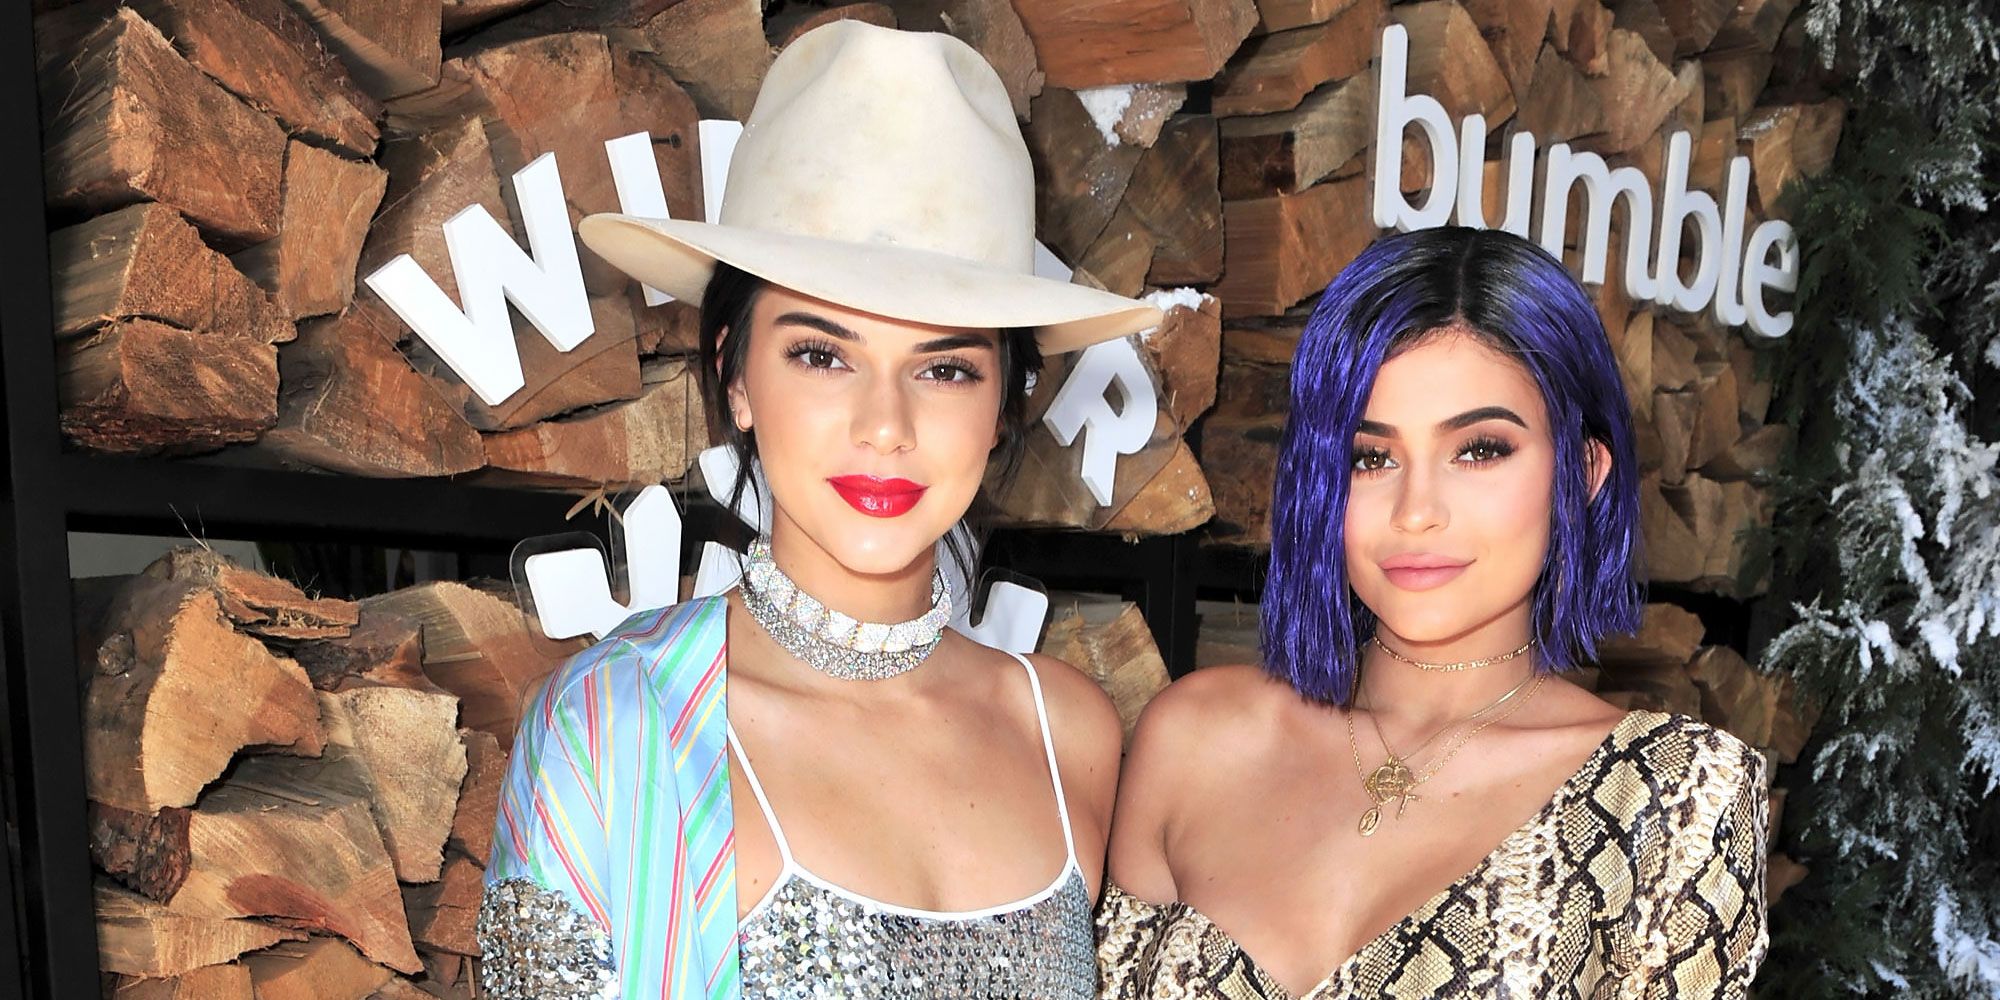 Kylie Jenner accused of cultural appropriation